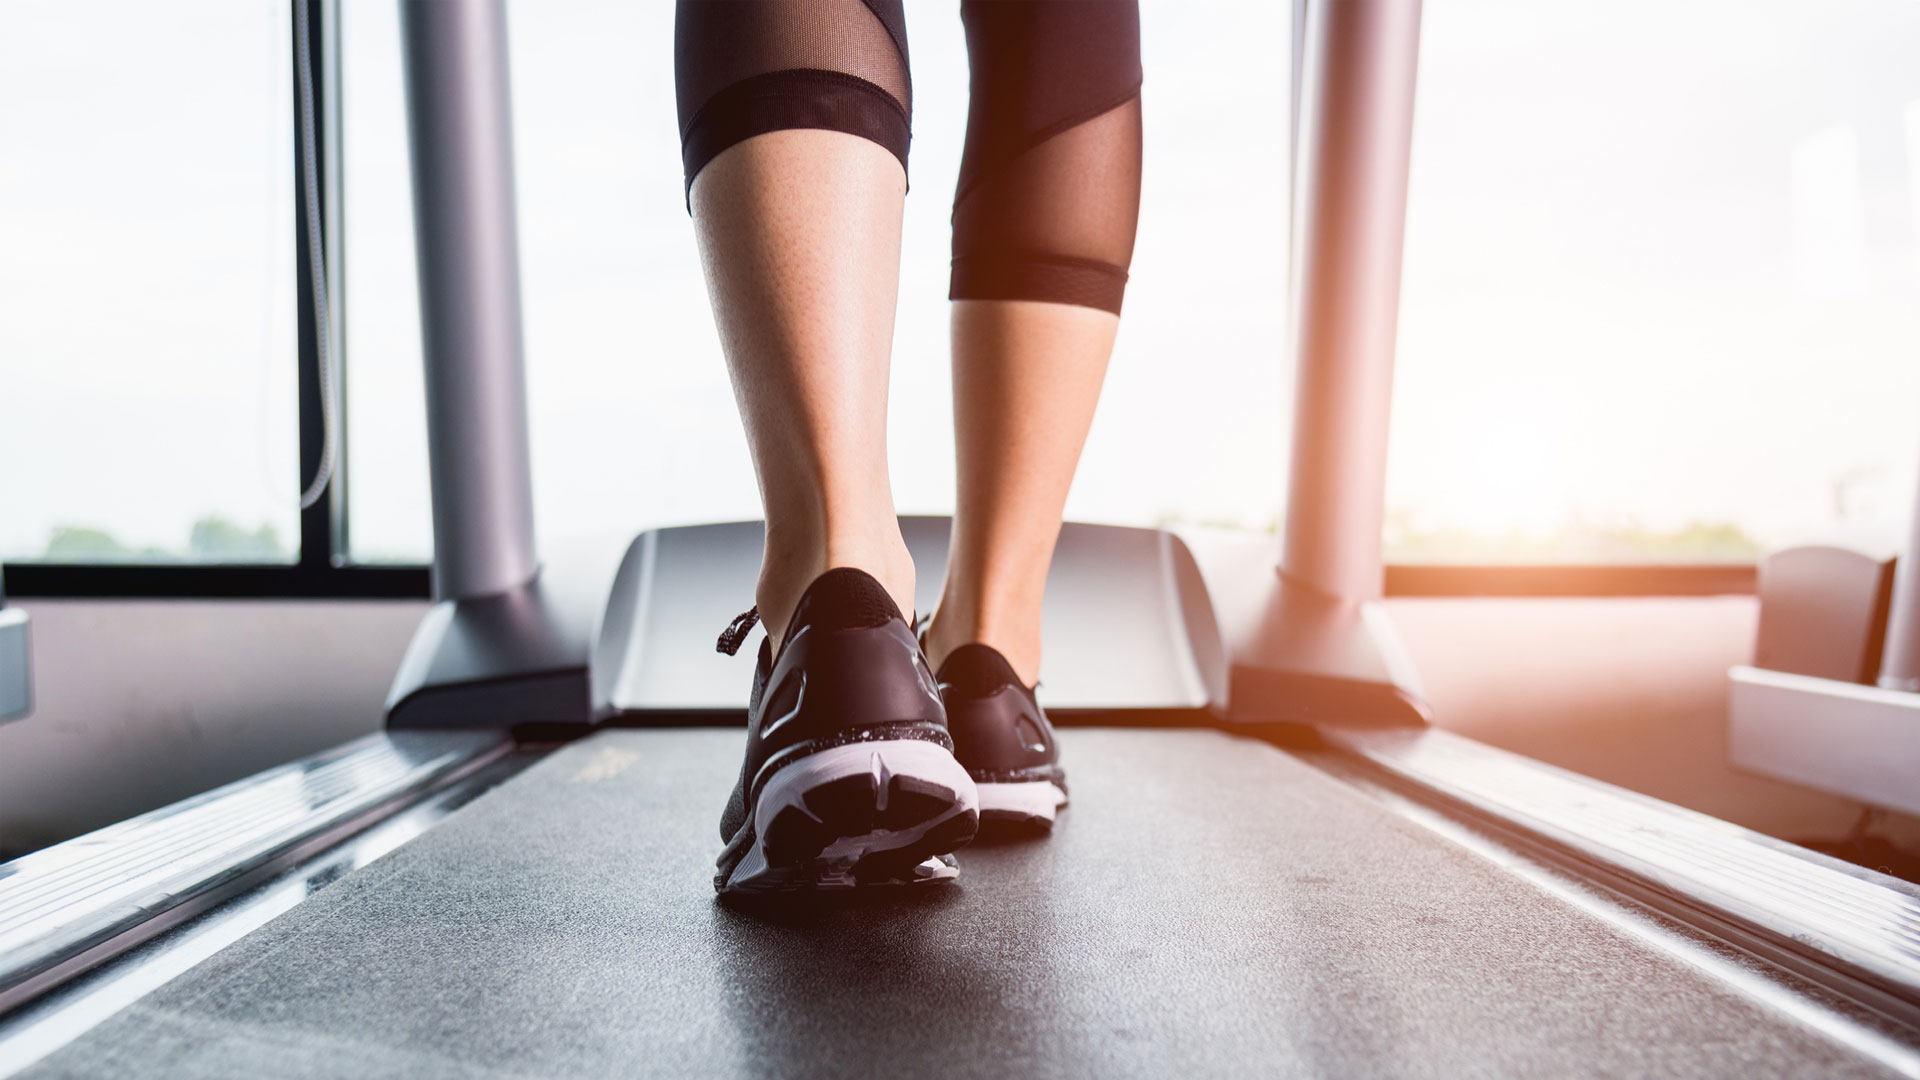 What is gait analysis? Image of running shoes on treadmill